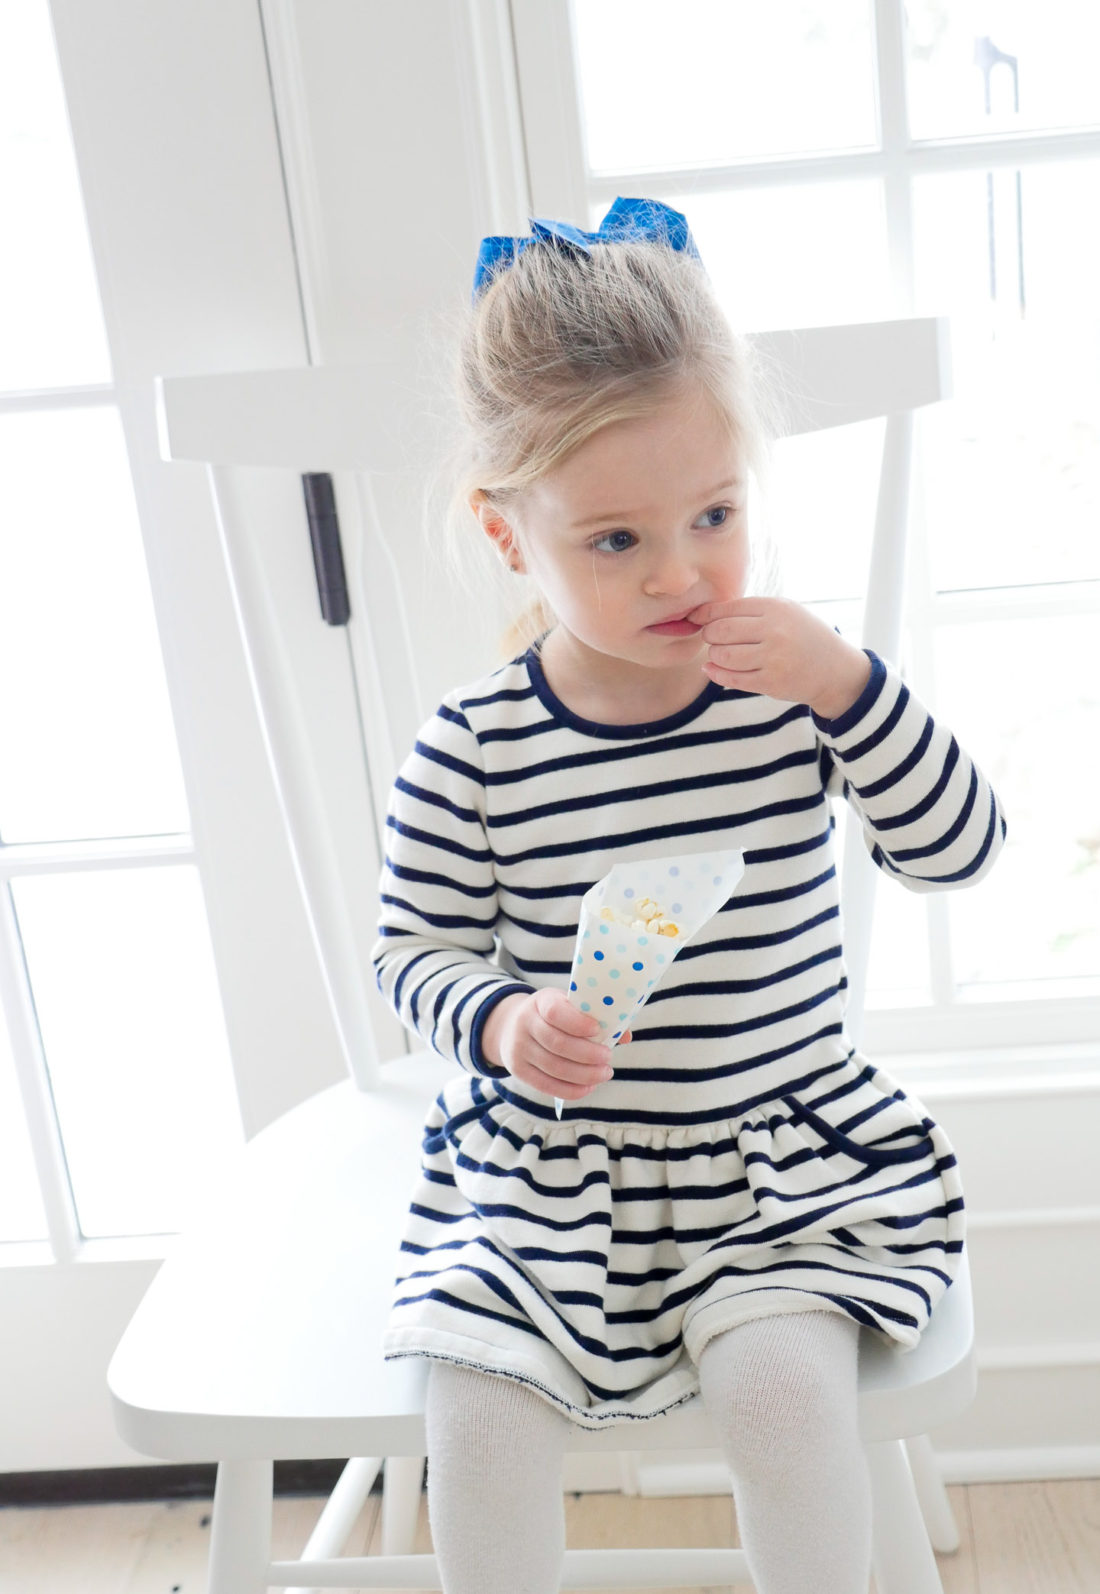 Marlowe Martino wears a striped nautical dress and munches from a cone of popcorn